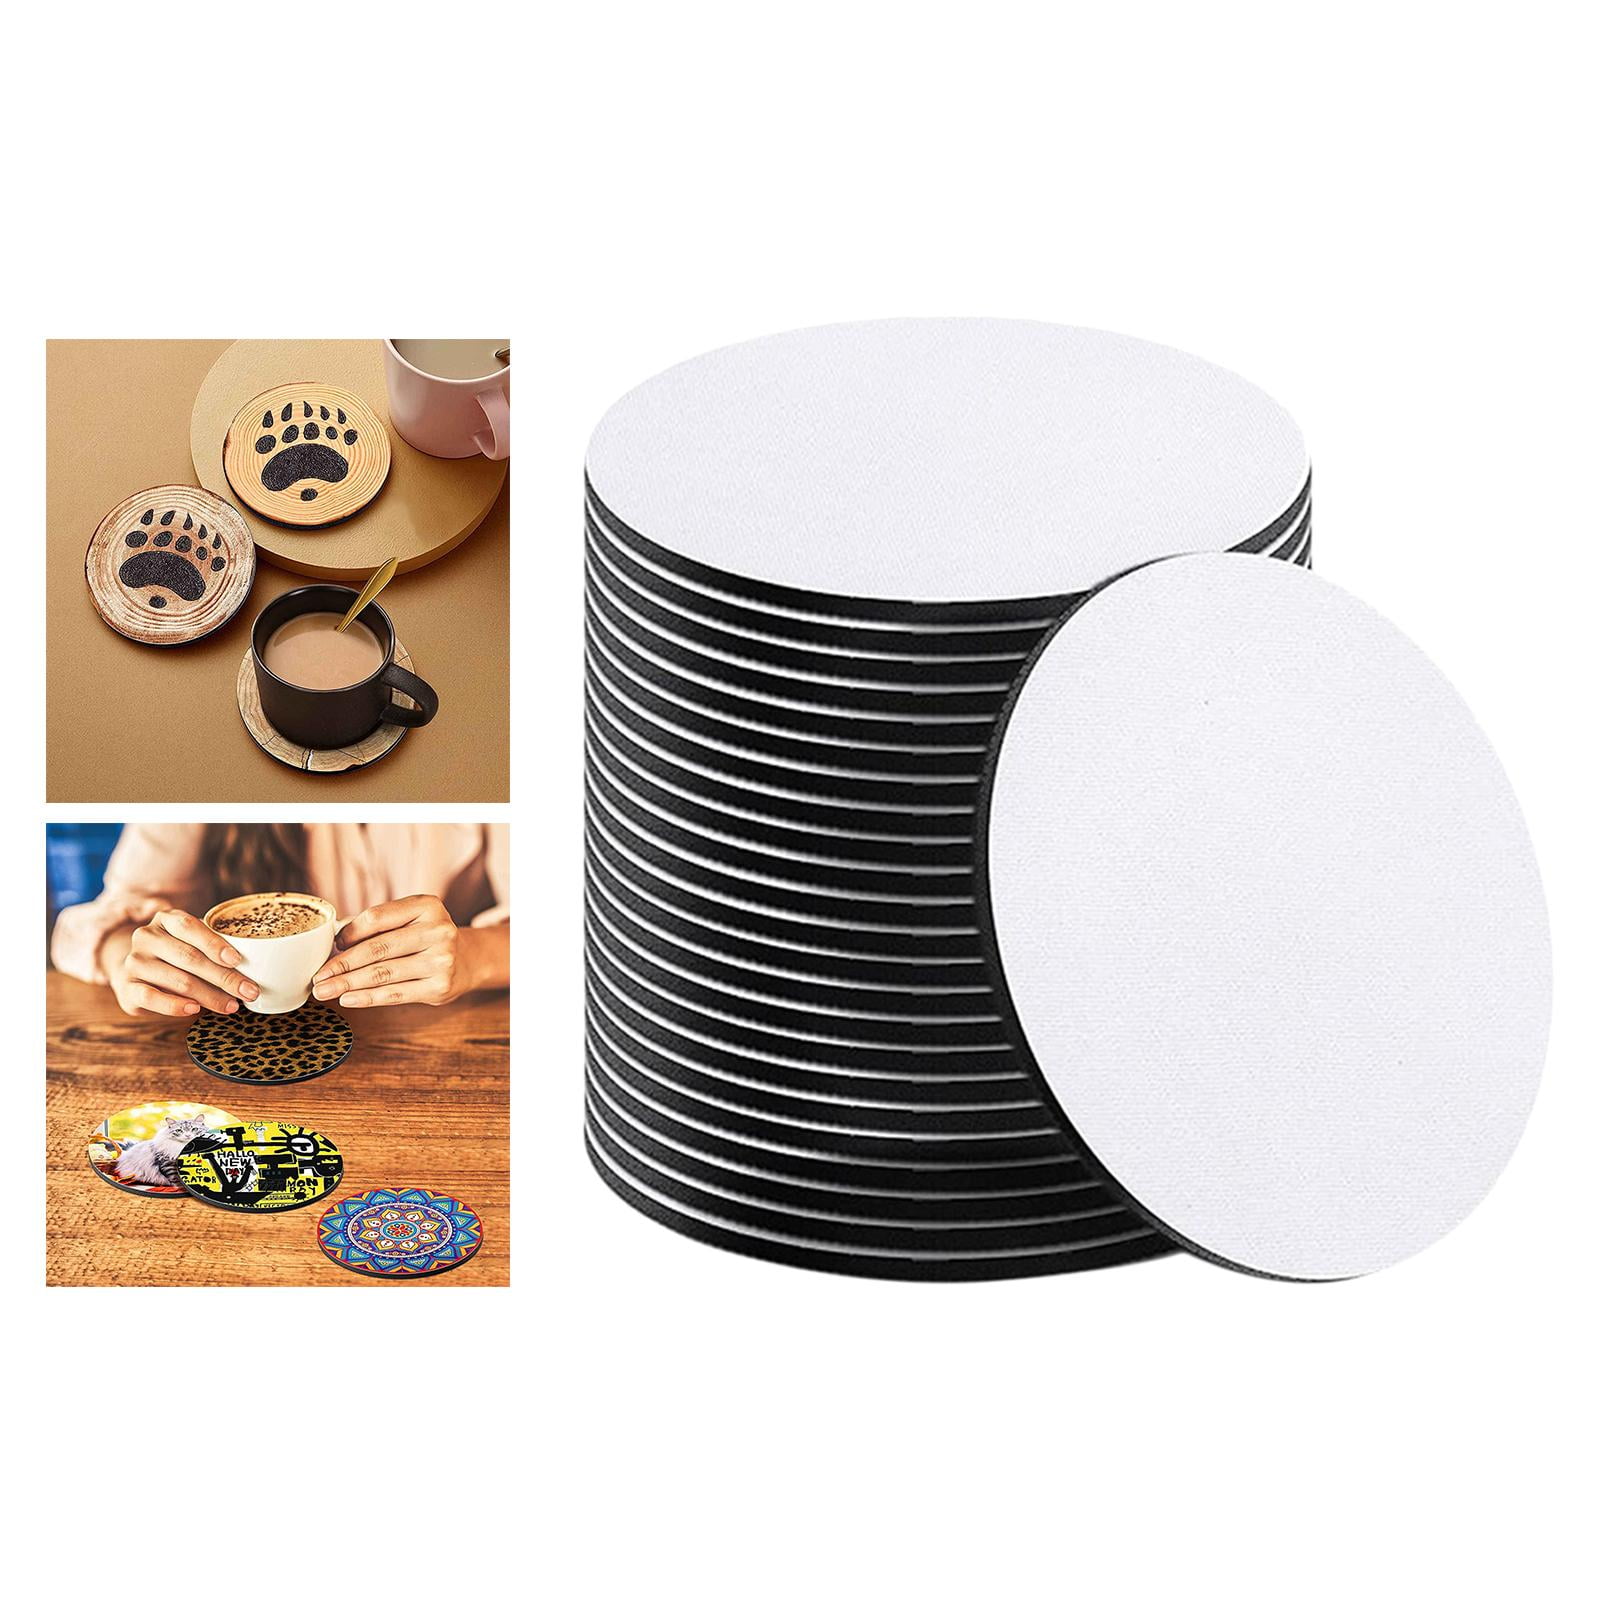 MAIKESUB Sublimation Blanks Drink Coasters Absorbent Coaster Sets of 6  Round Ceramic Drink Coaster for Tabletop Protection Suitable for DIY Crafts